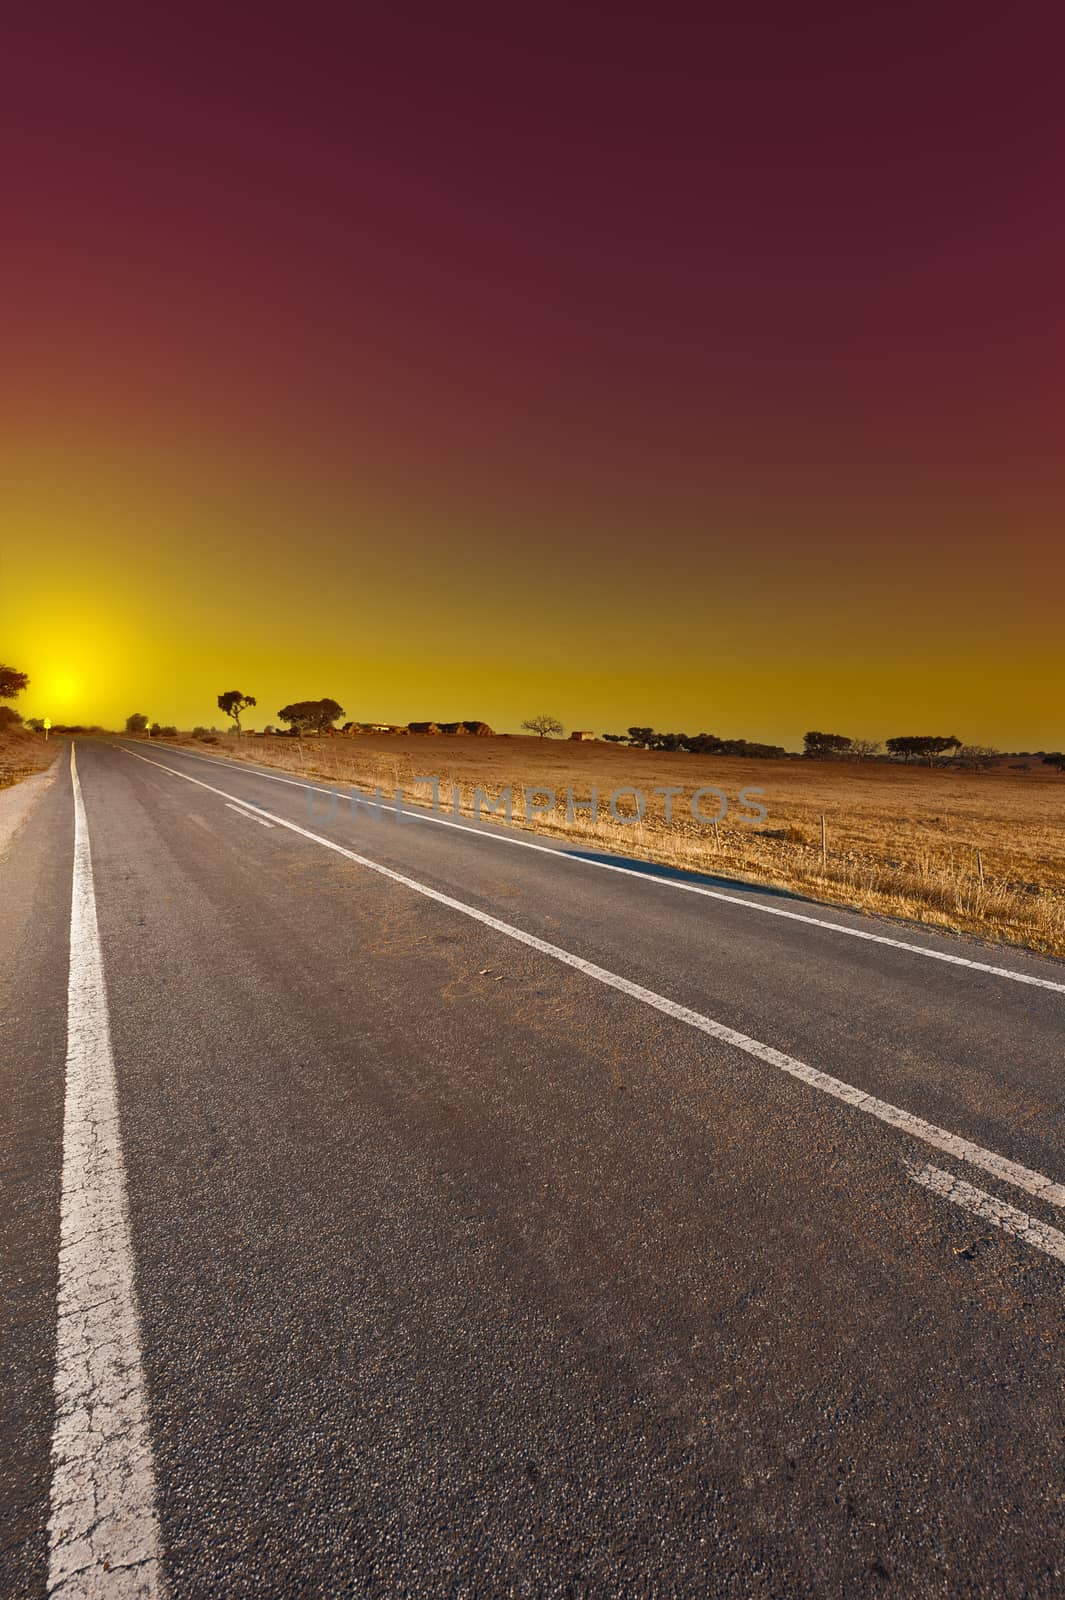 Road at Sunset by gkuna